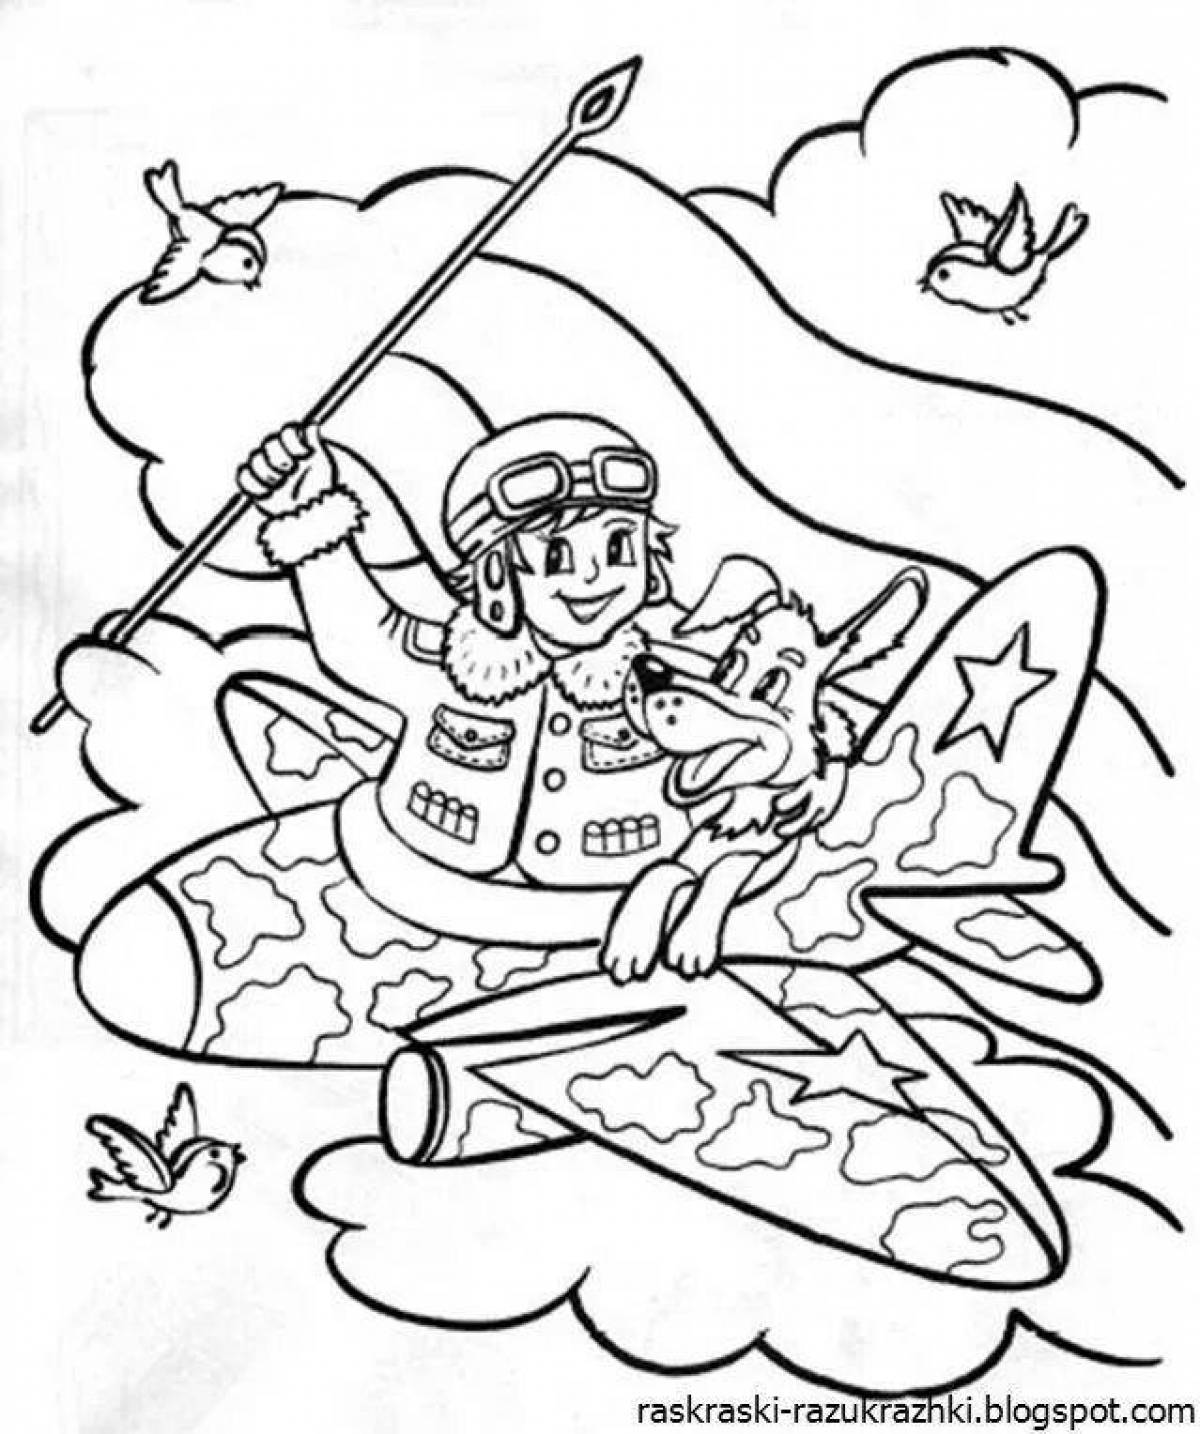 February 2 funny coloring book